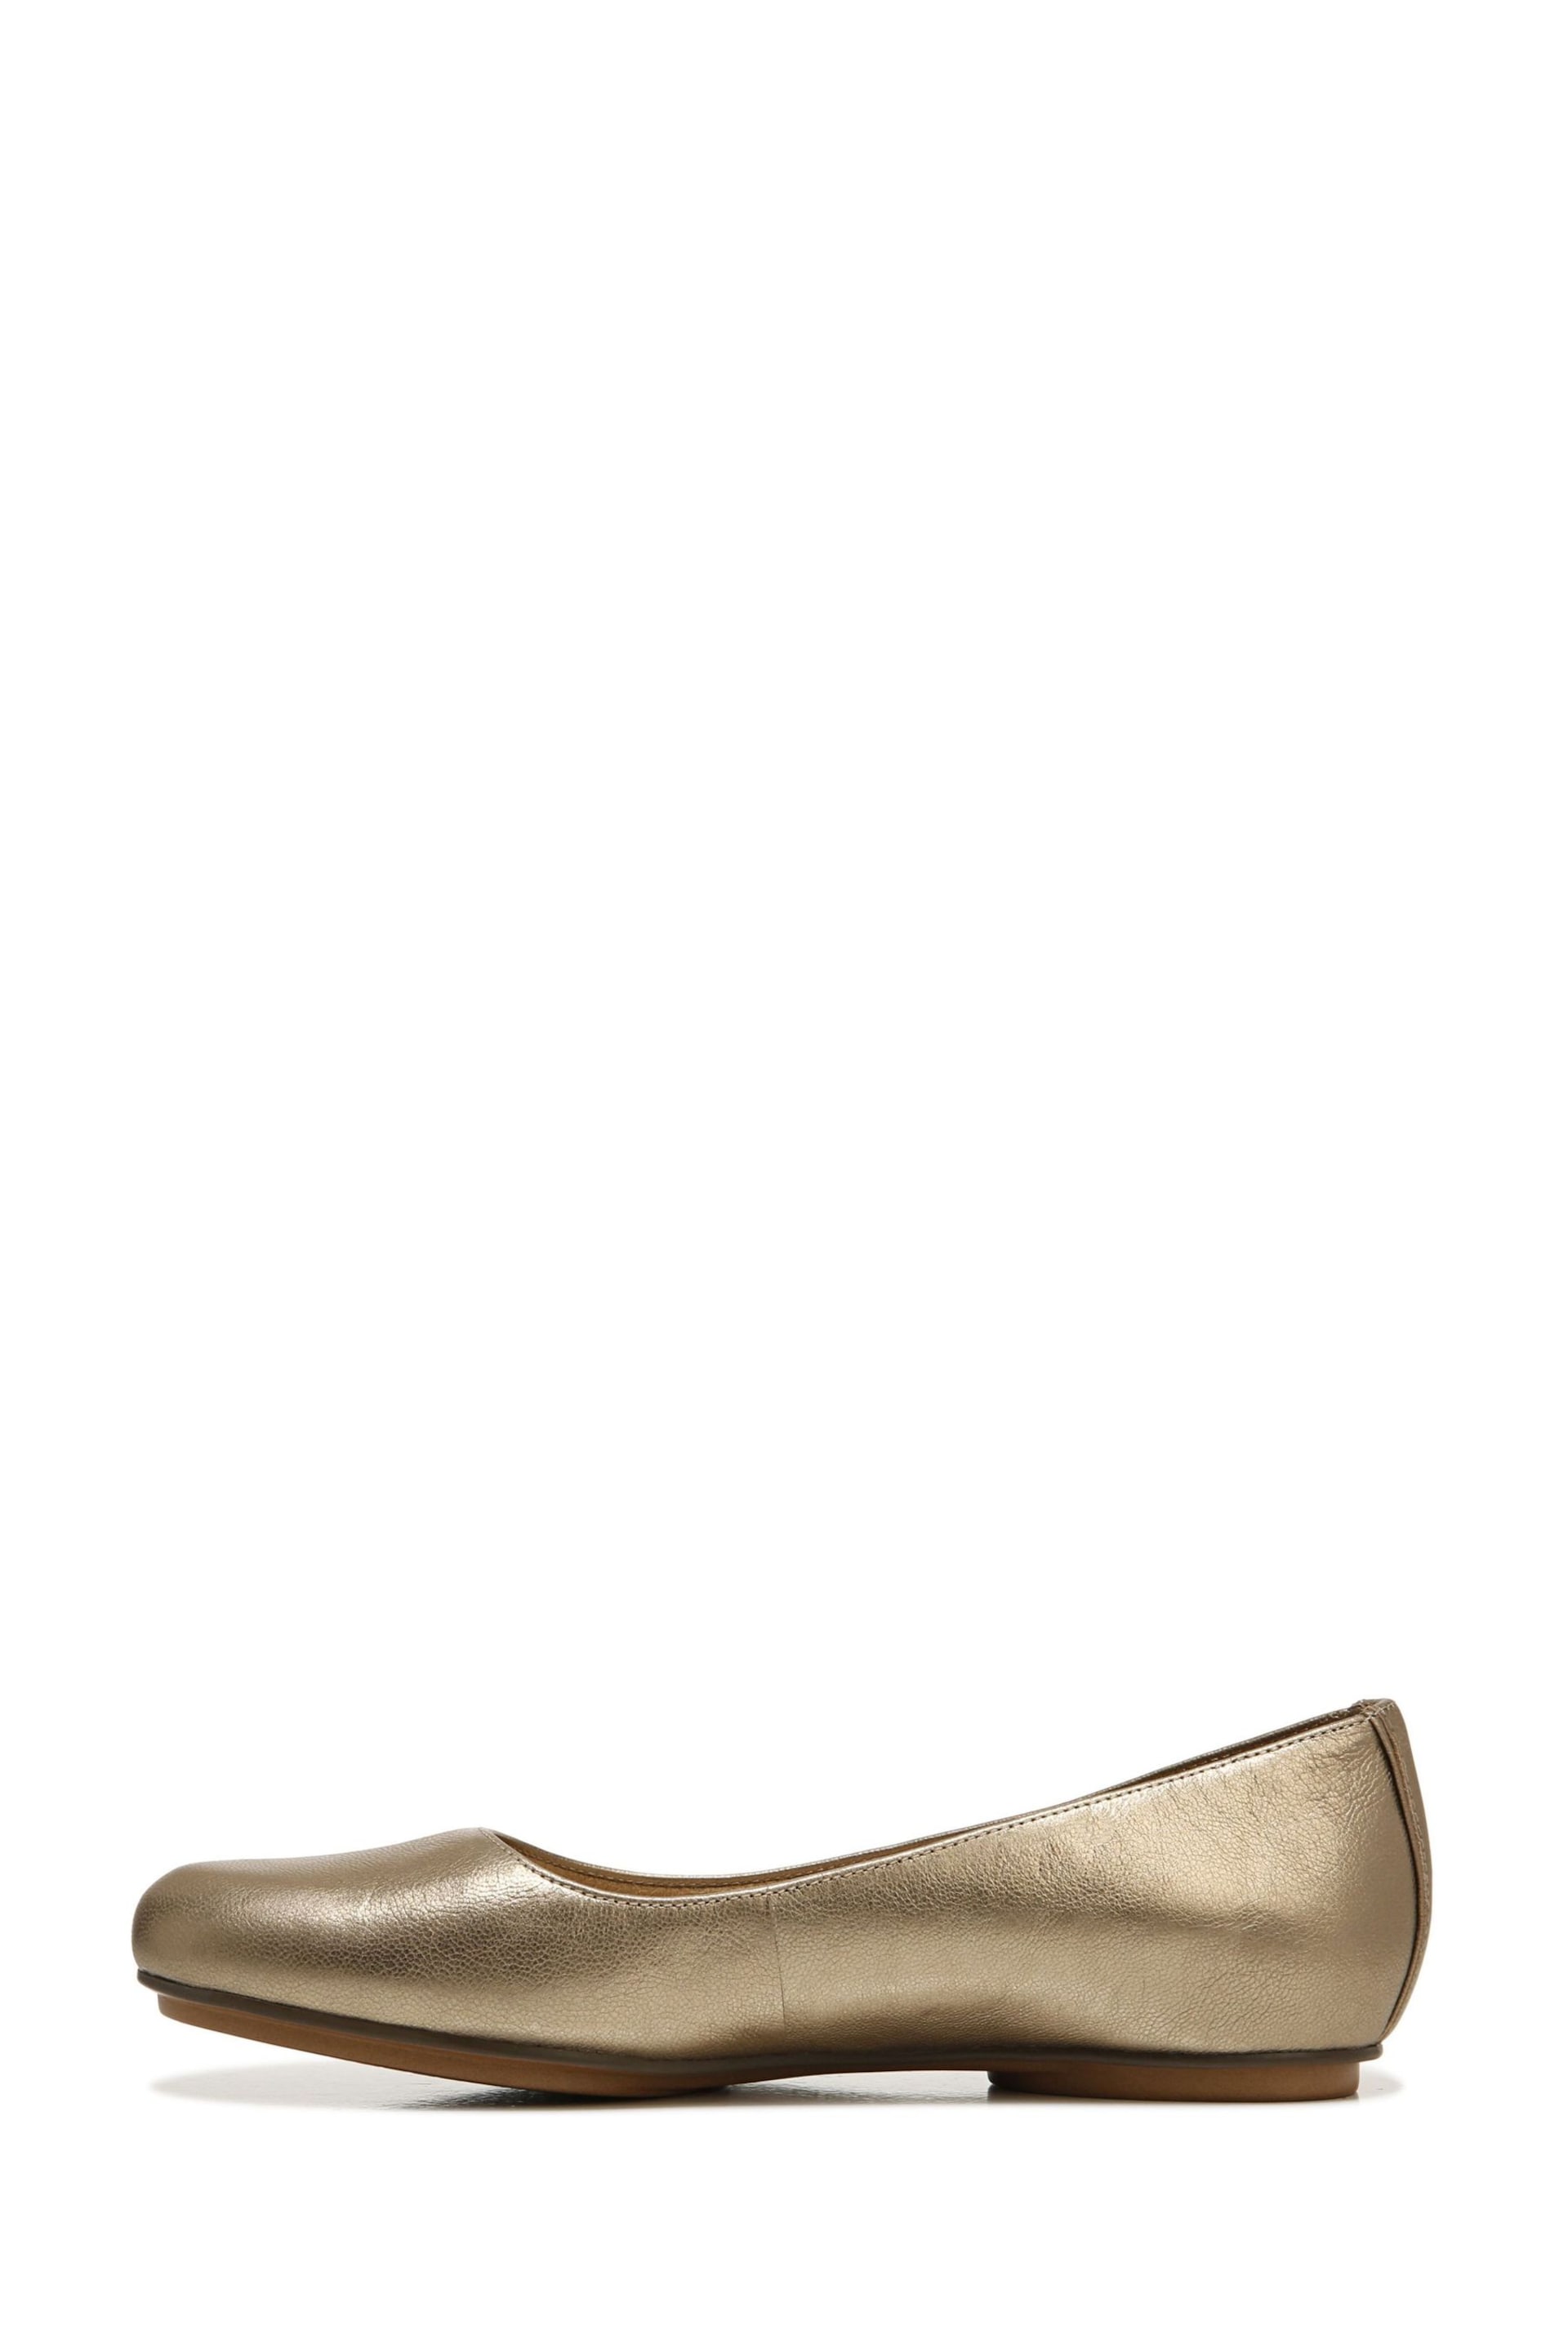 Naturalizer Maxwell Leather Ballerina Shoes - Image 2 of 7